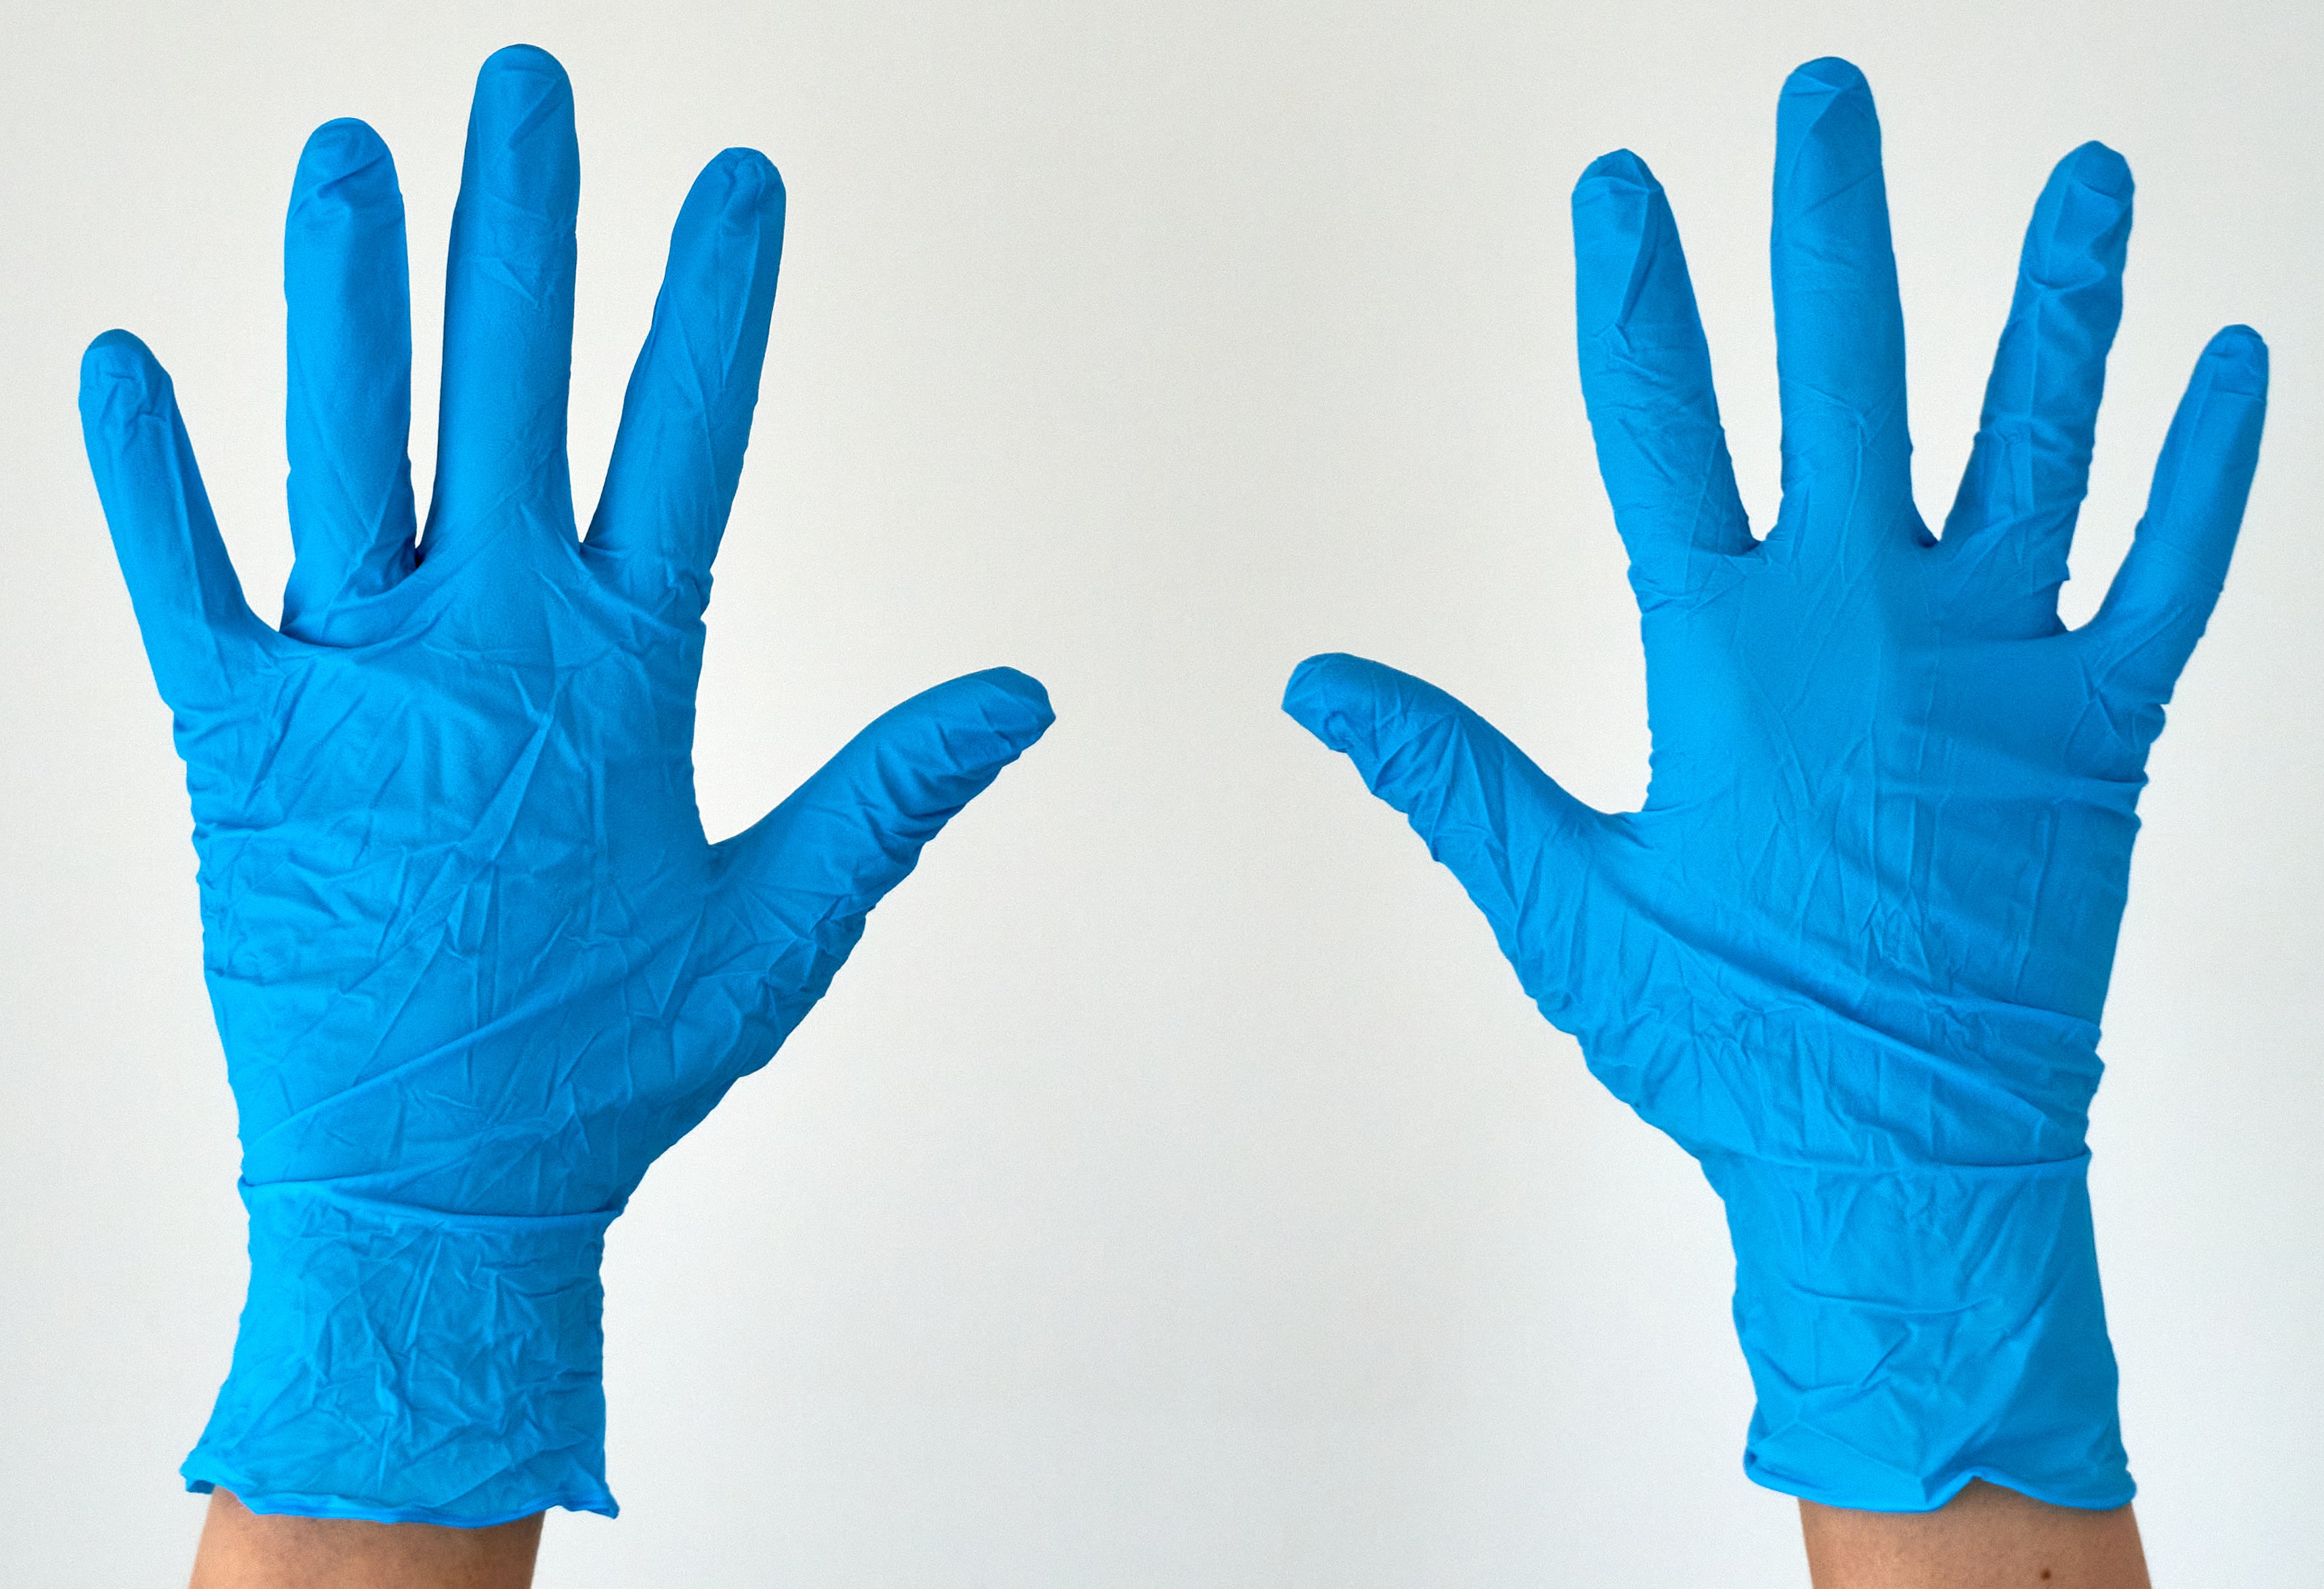 All About Vinyl Gloves